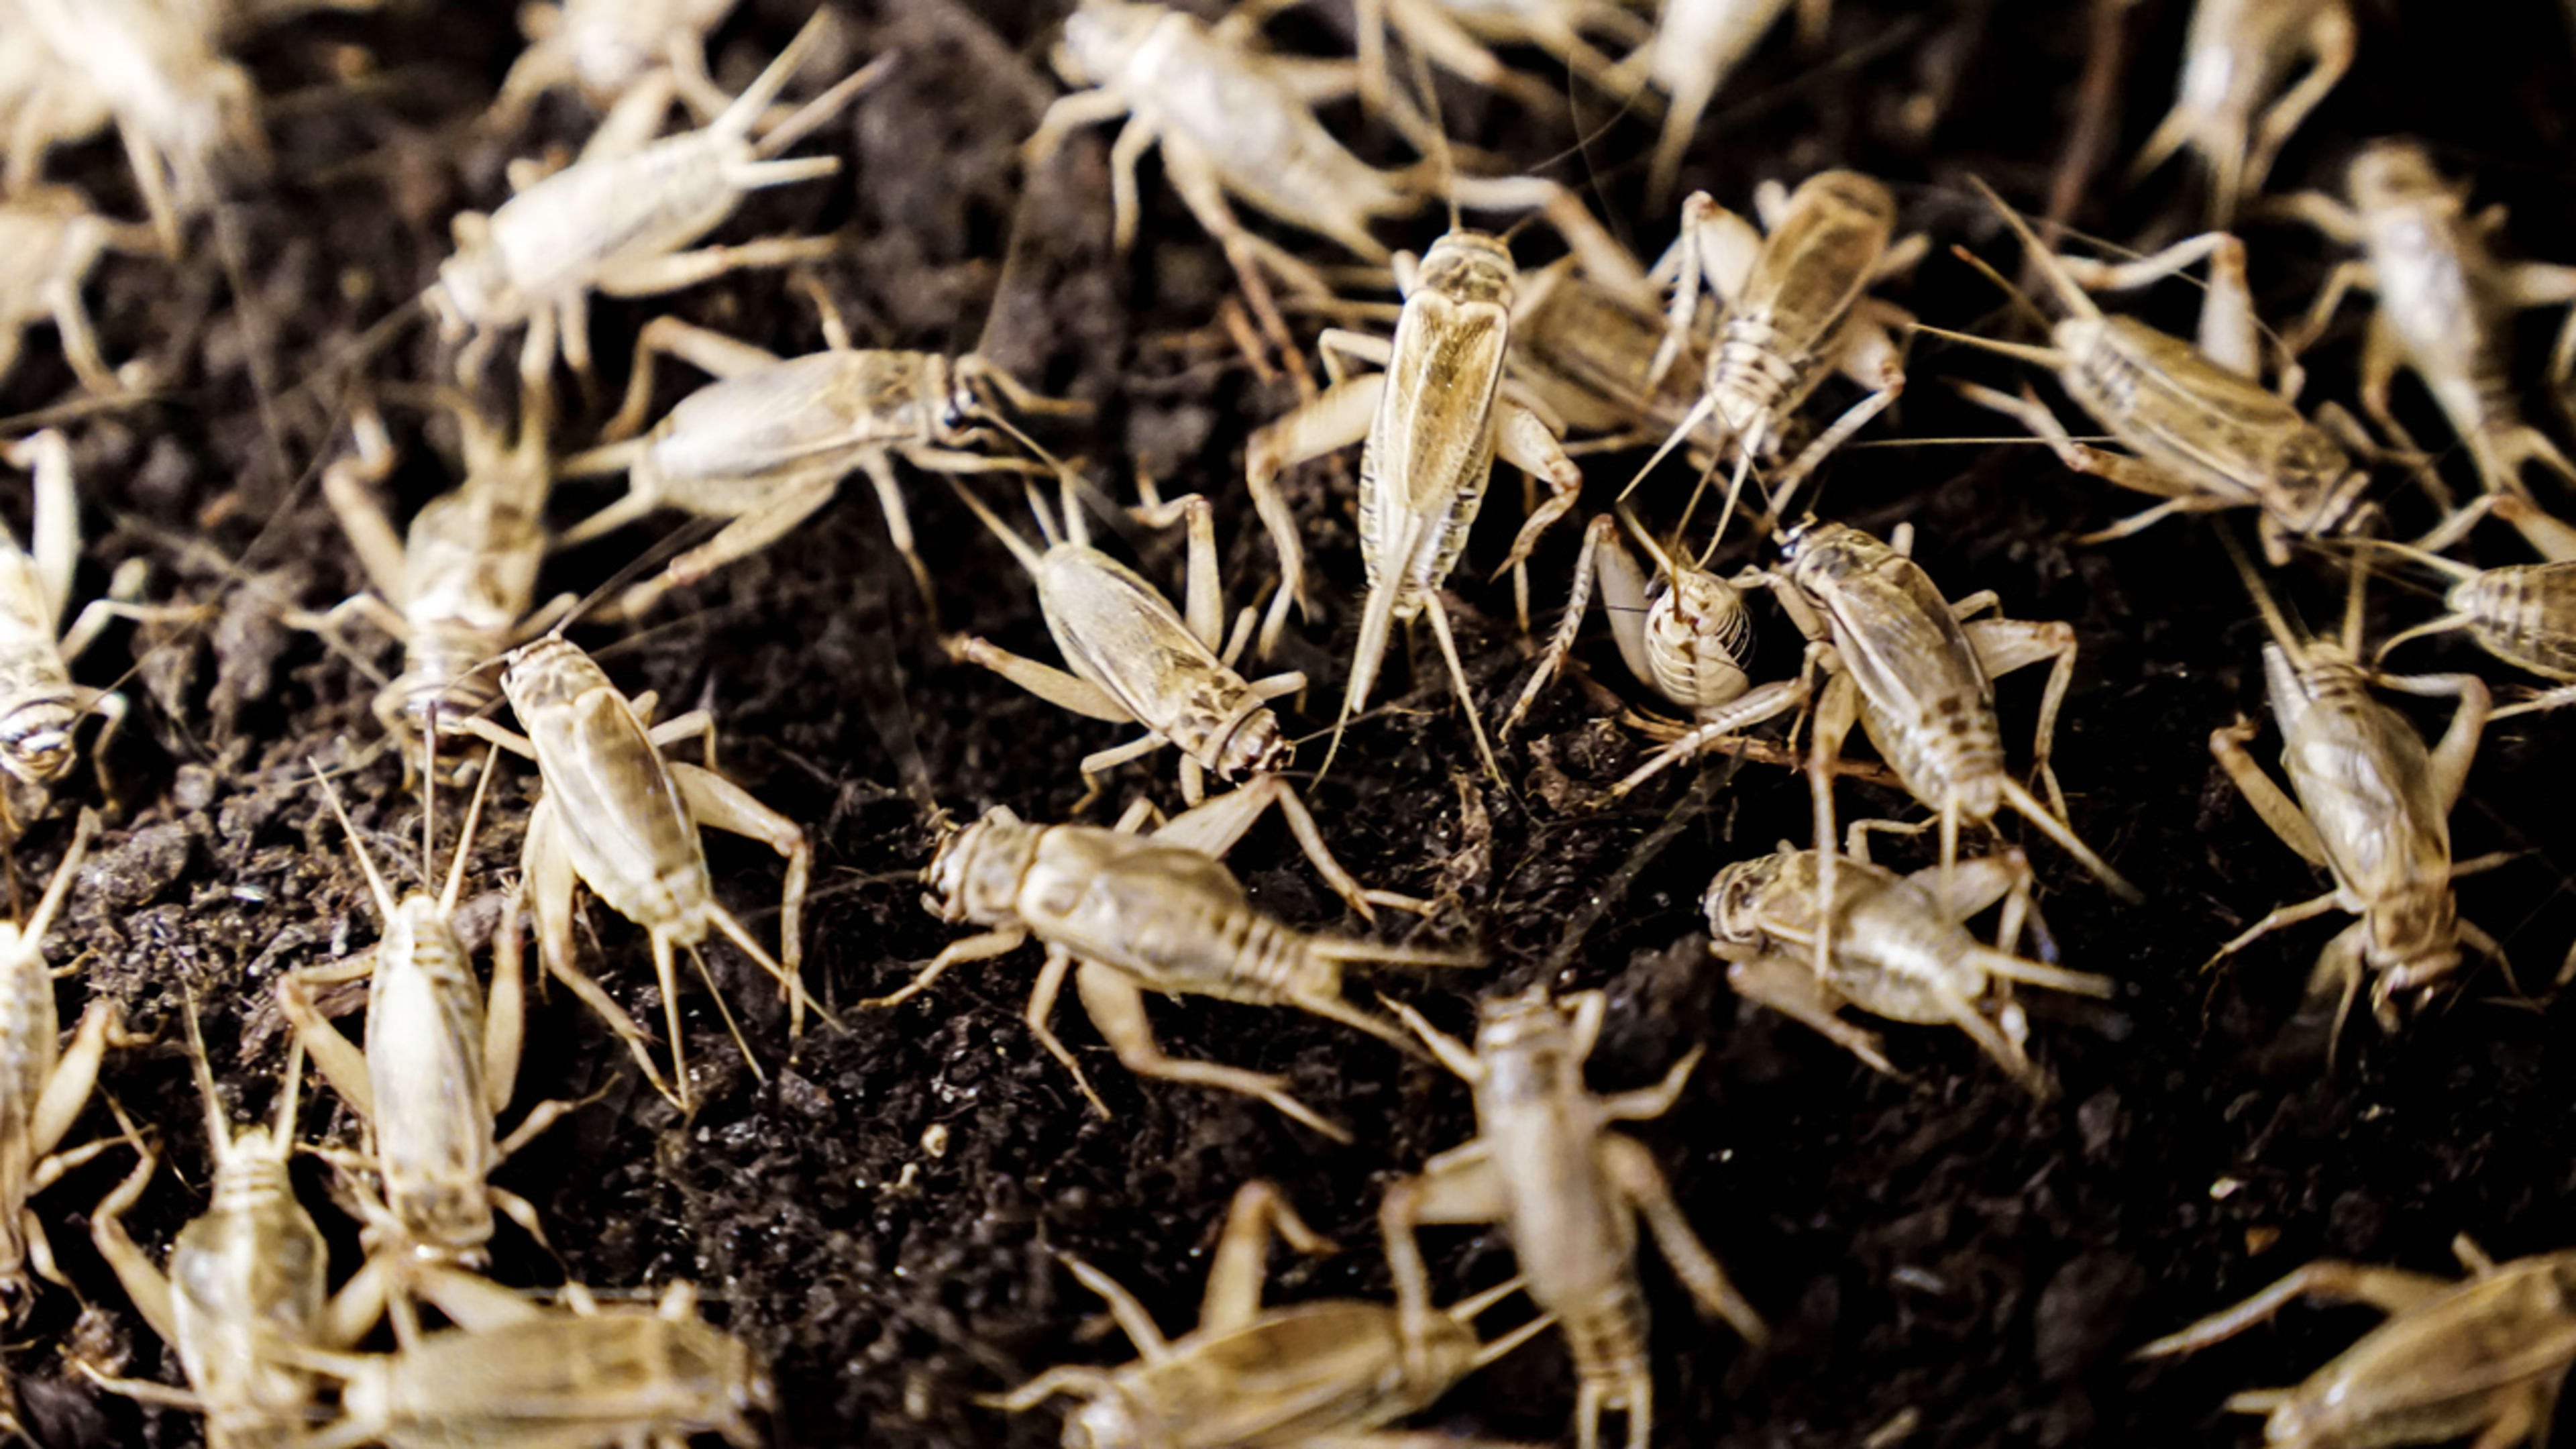 This Giant Automated Cricket Farm Is Designed To Make Bugs A Mainstream Source Of Protein